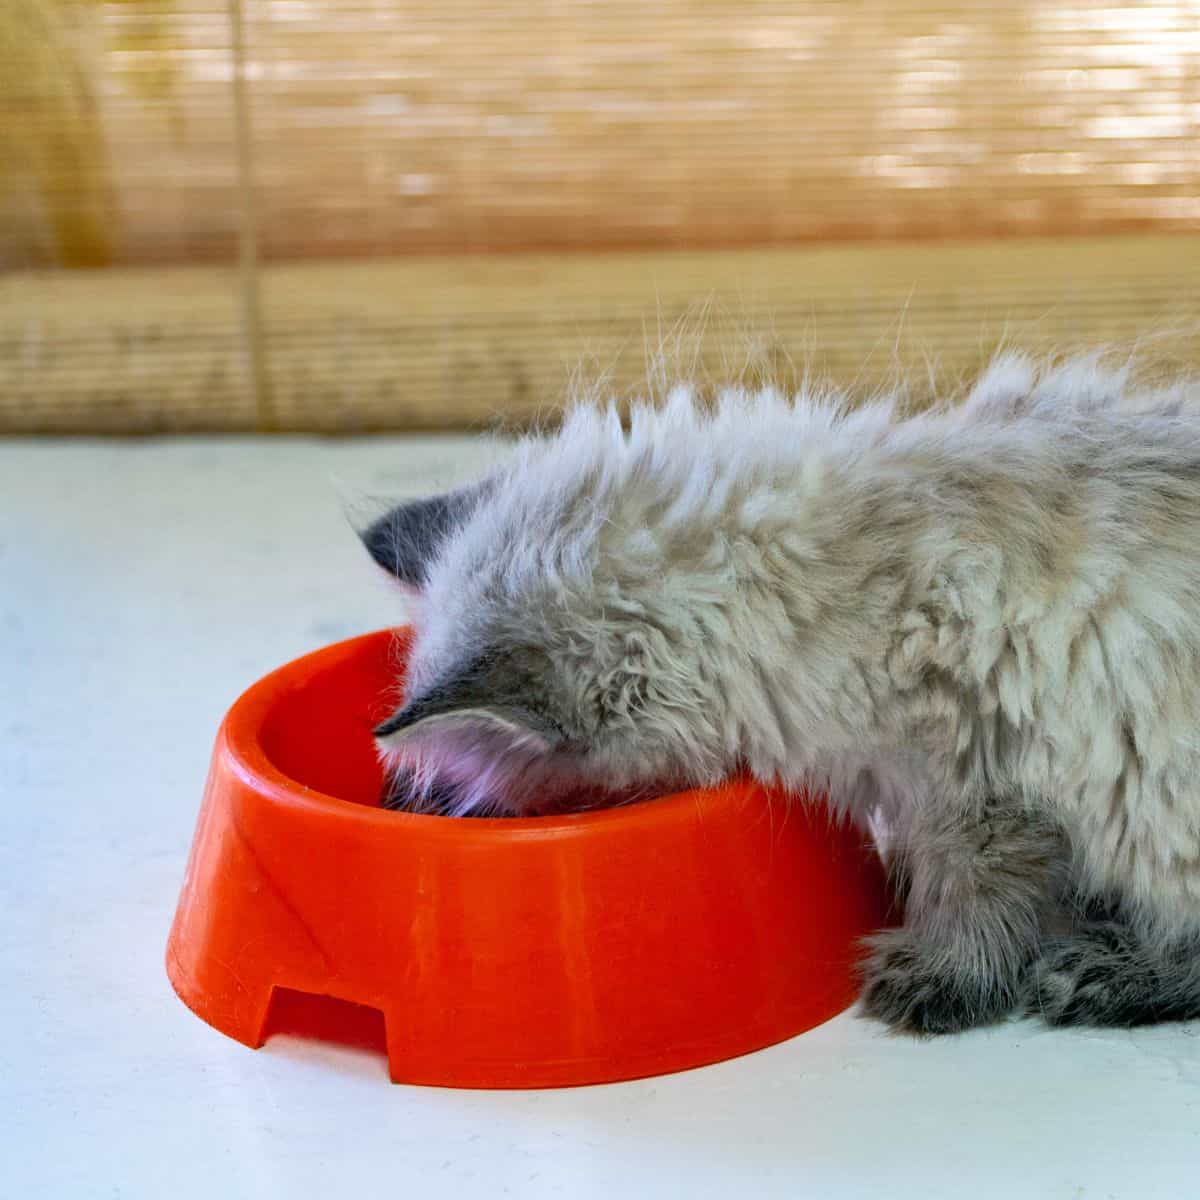 photo of cat eating